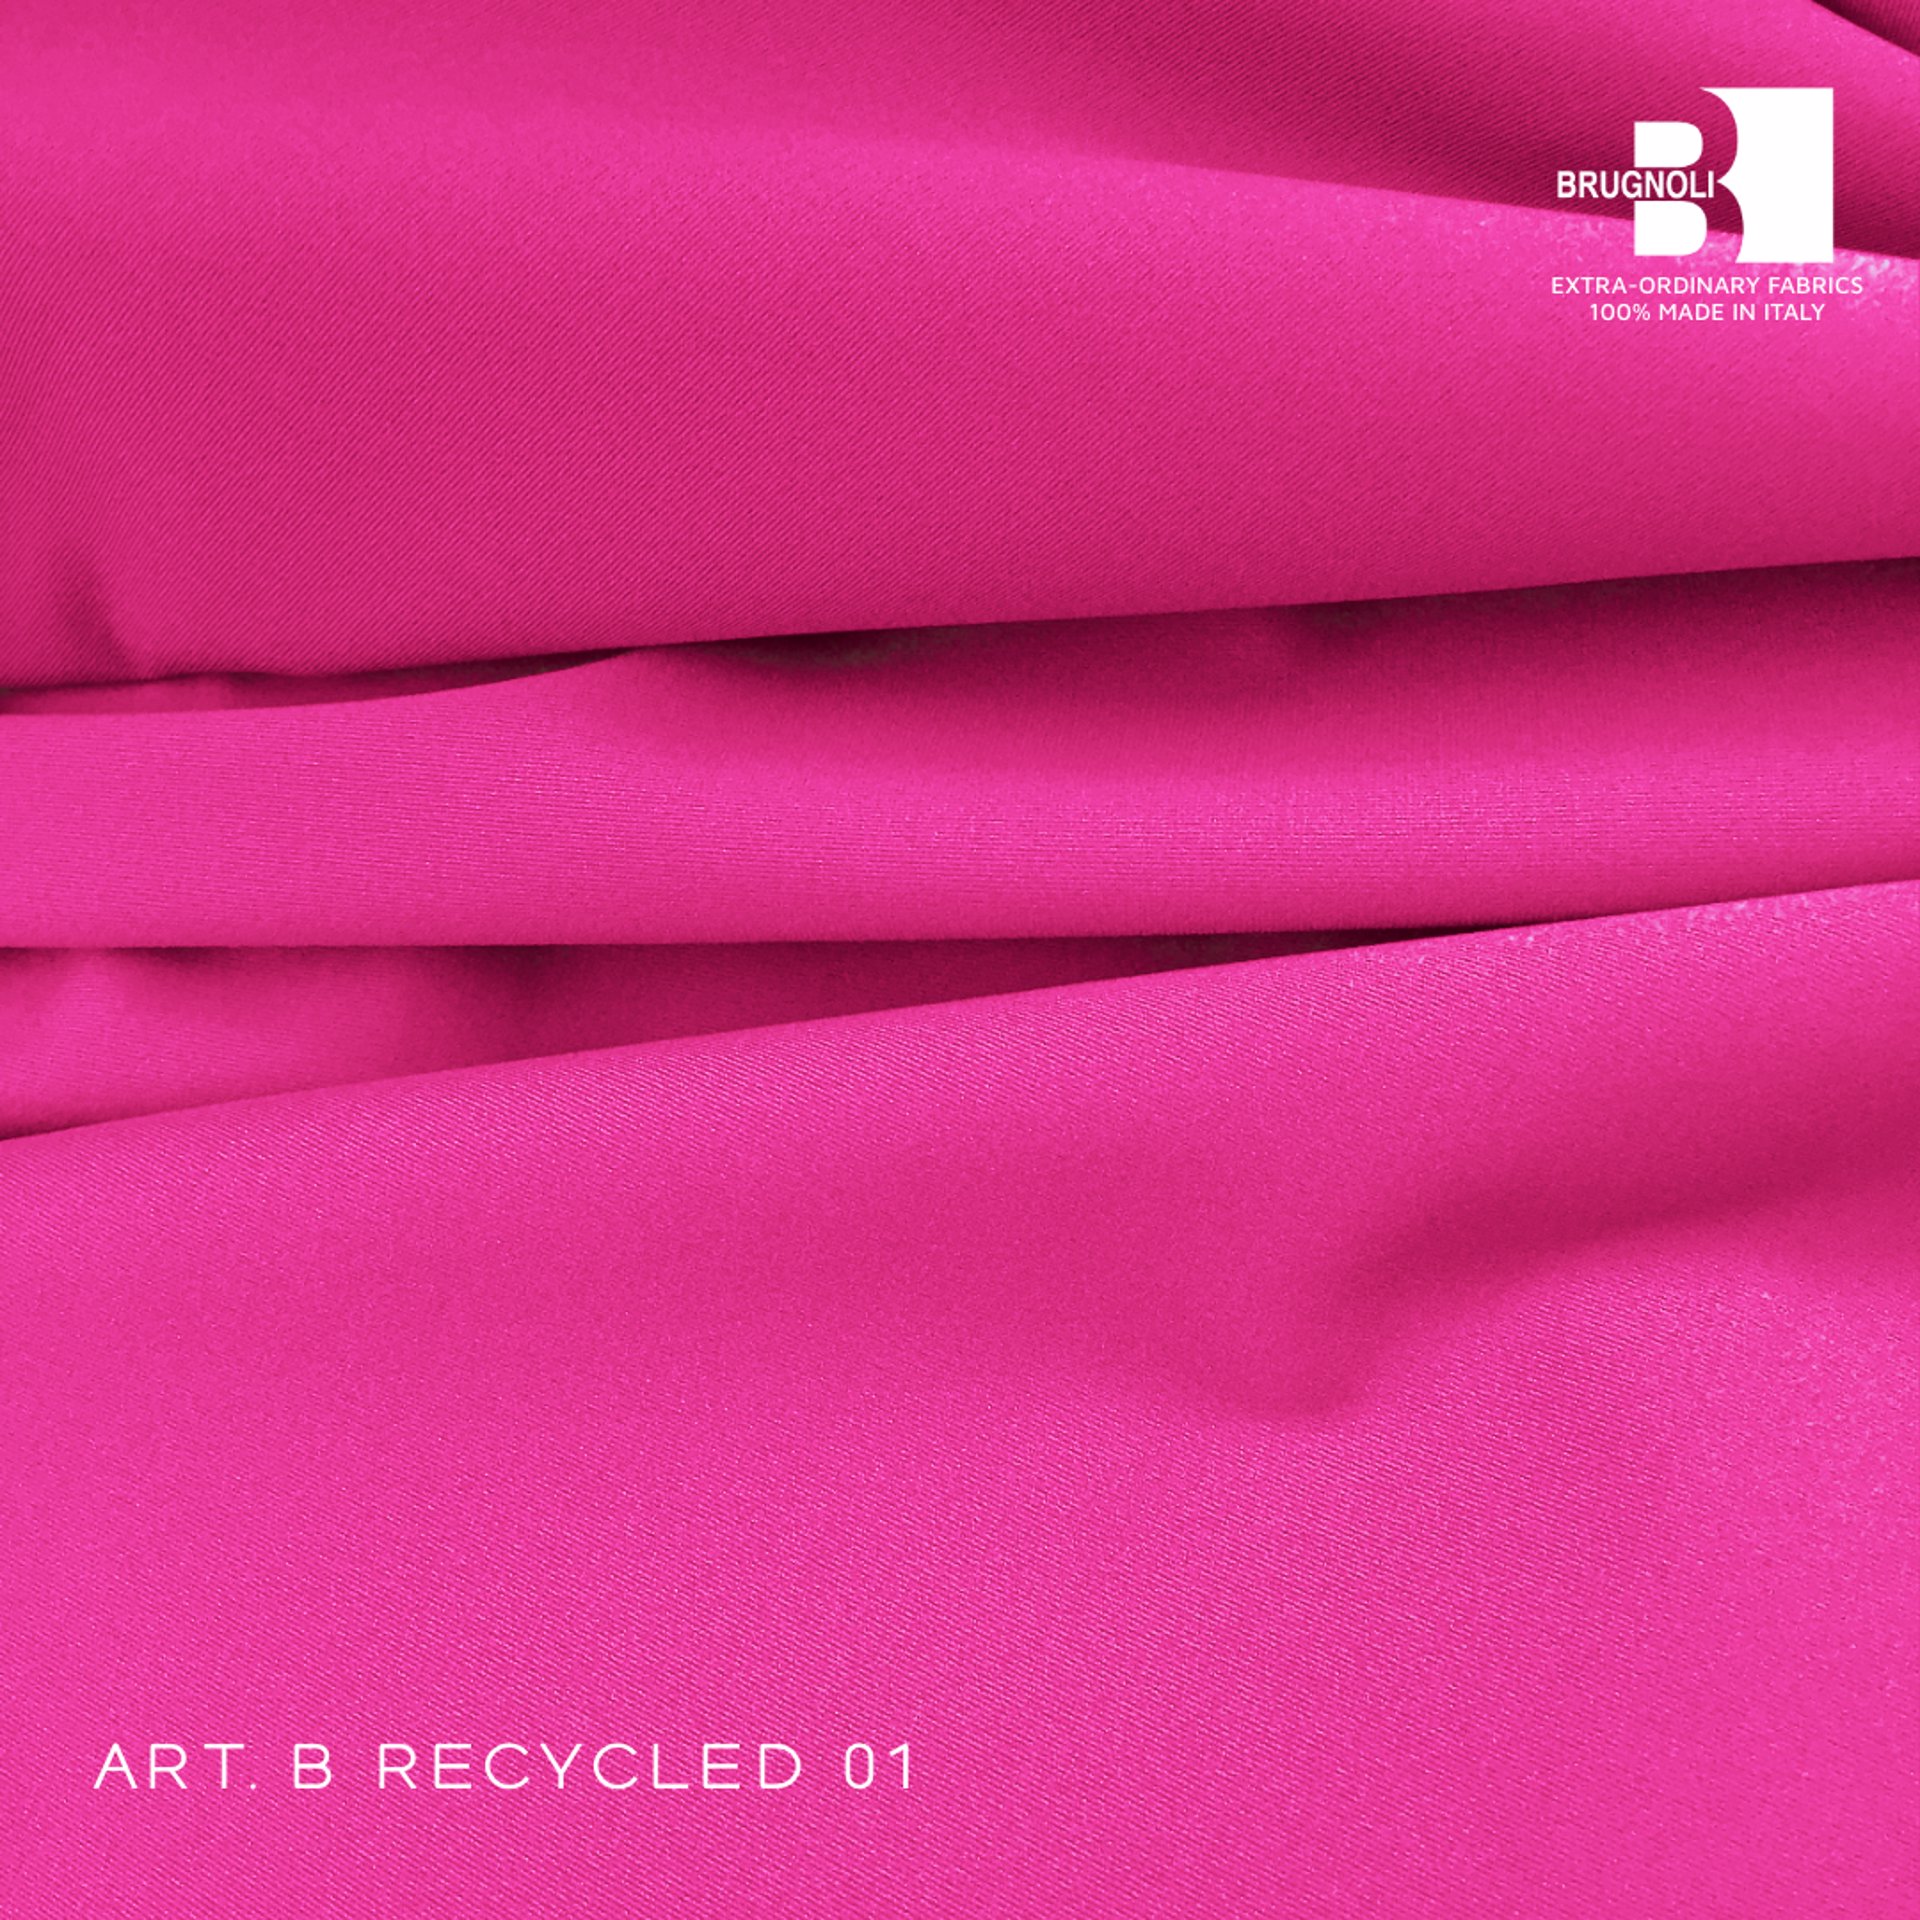 B RECYCLED 01